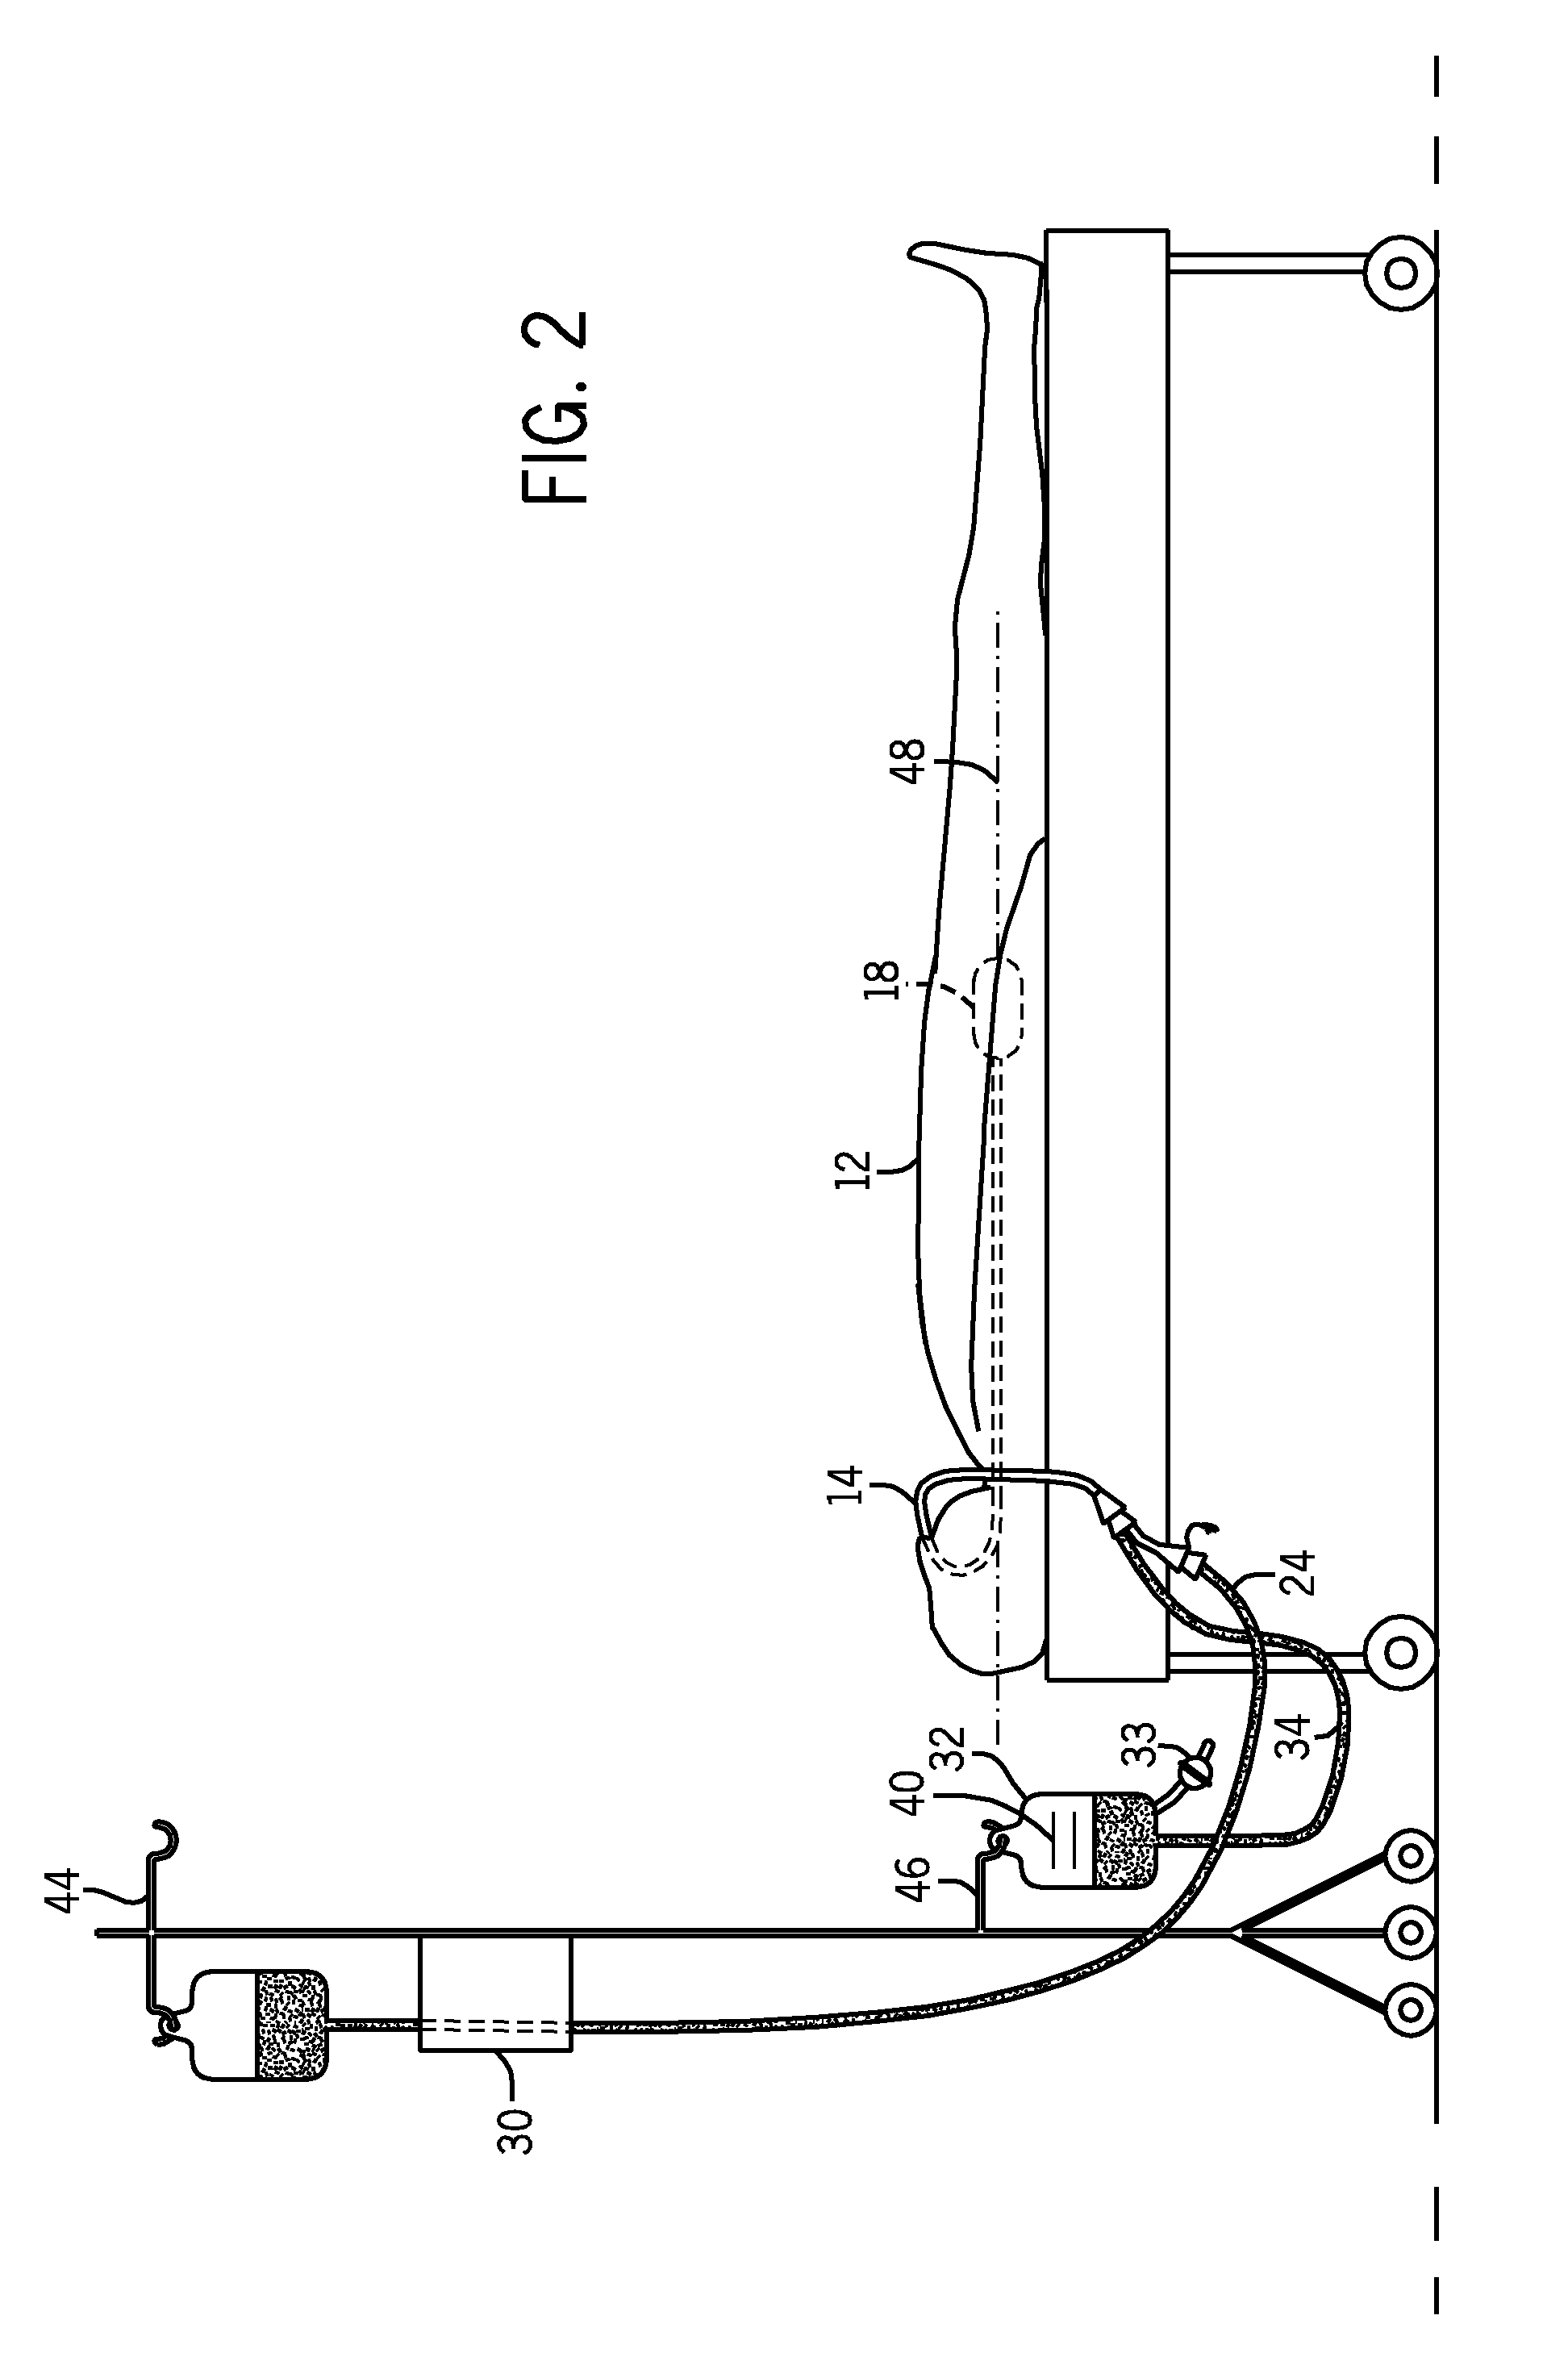 Method and system for the determination of residual volume in patients having an enteral feeding tube